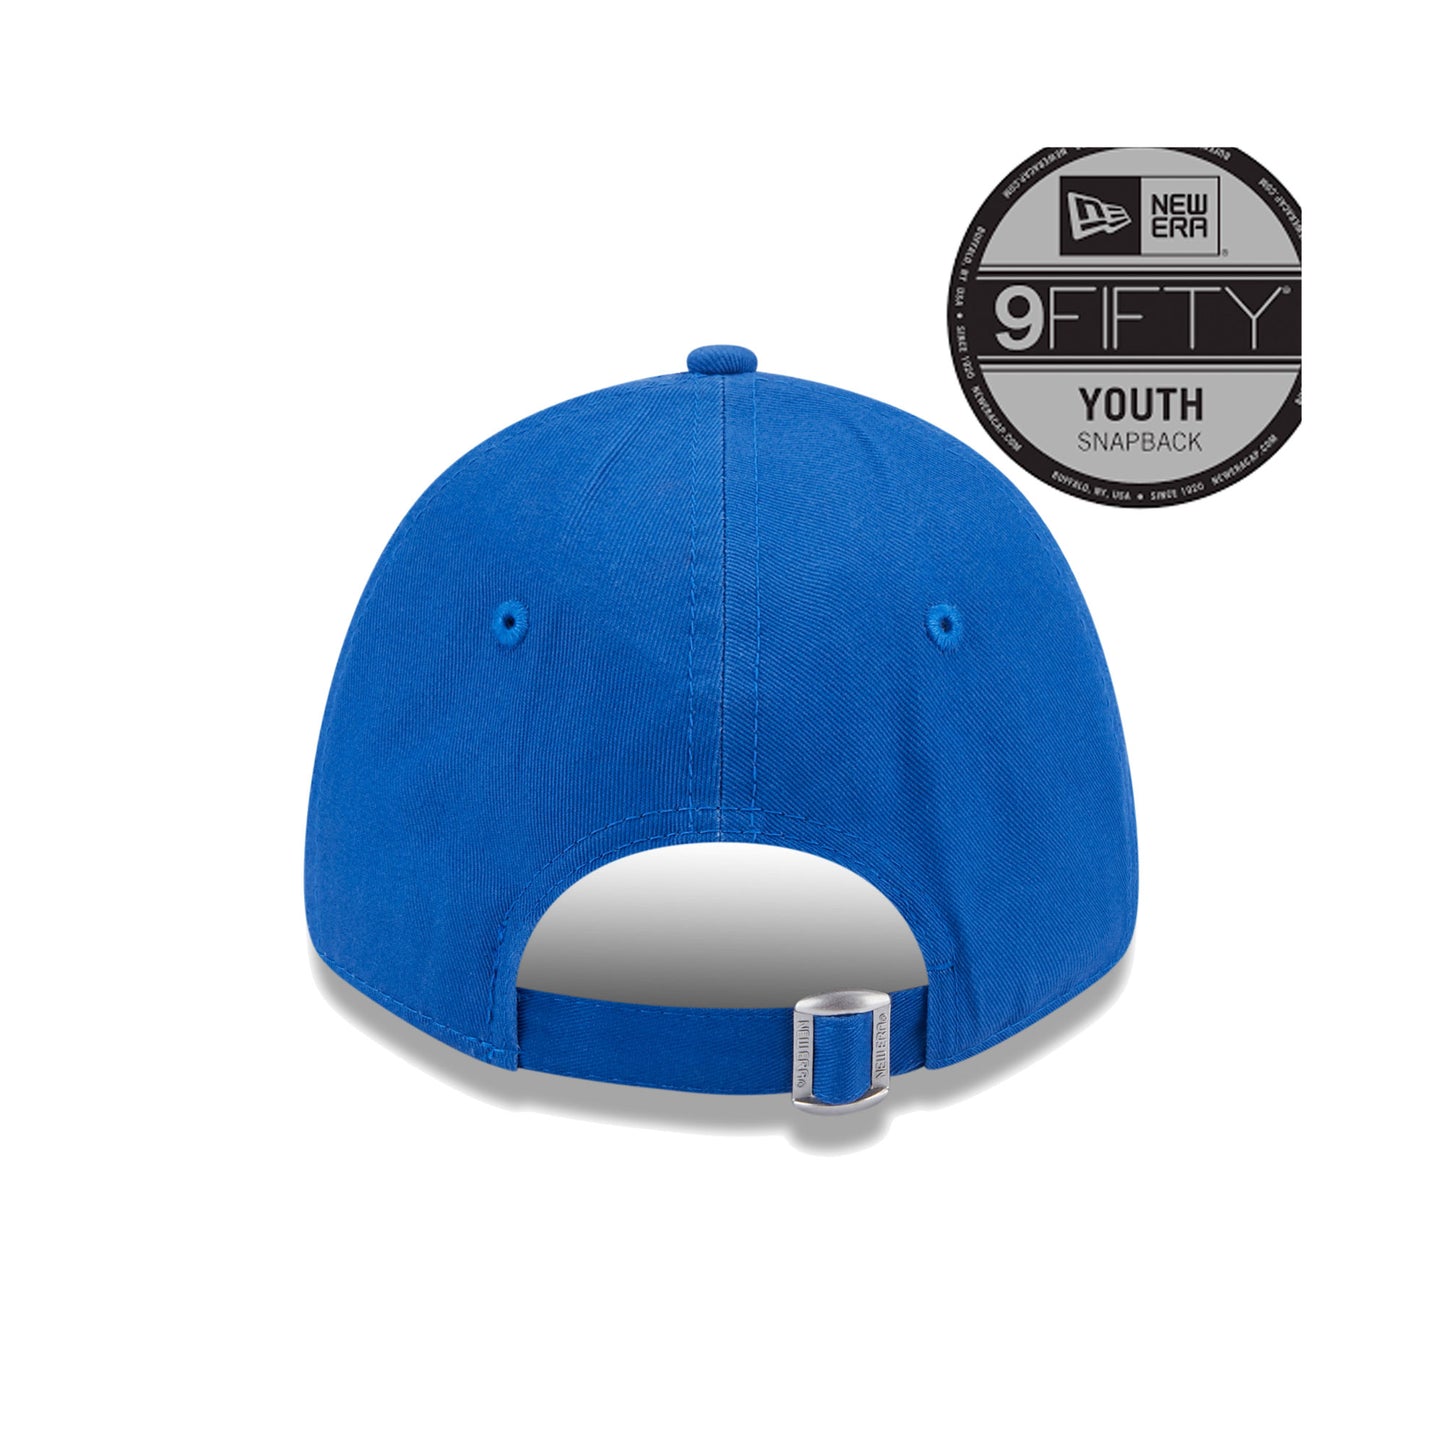 Los Angeles Dodgers New Era 9FORTY YOUTH Strap back Cap royal